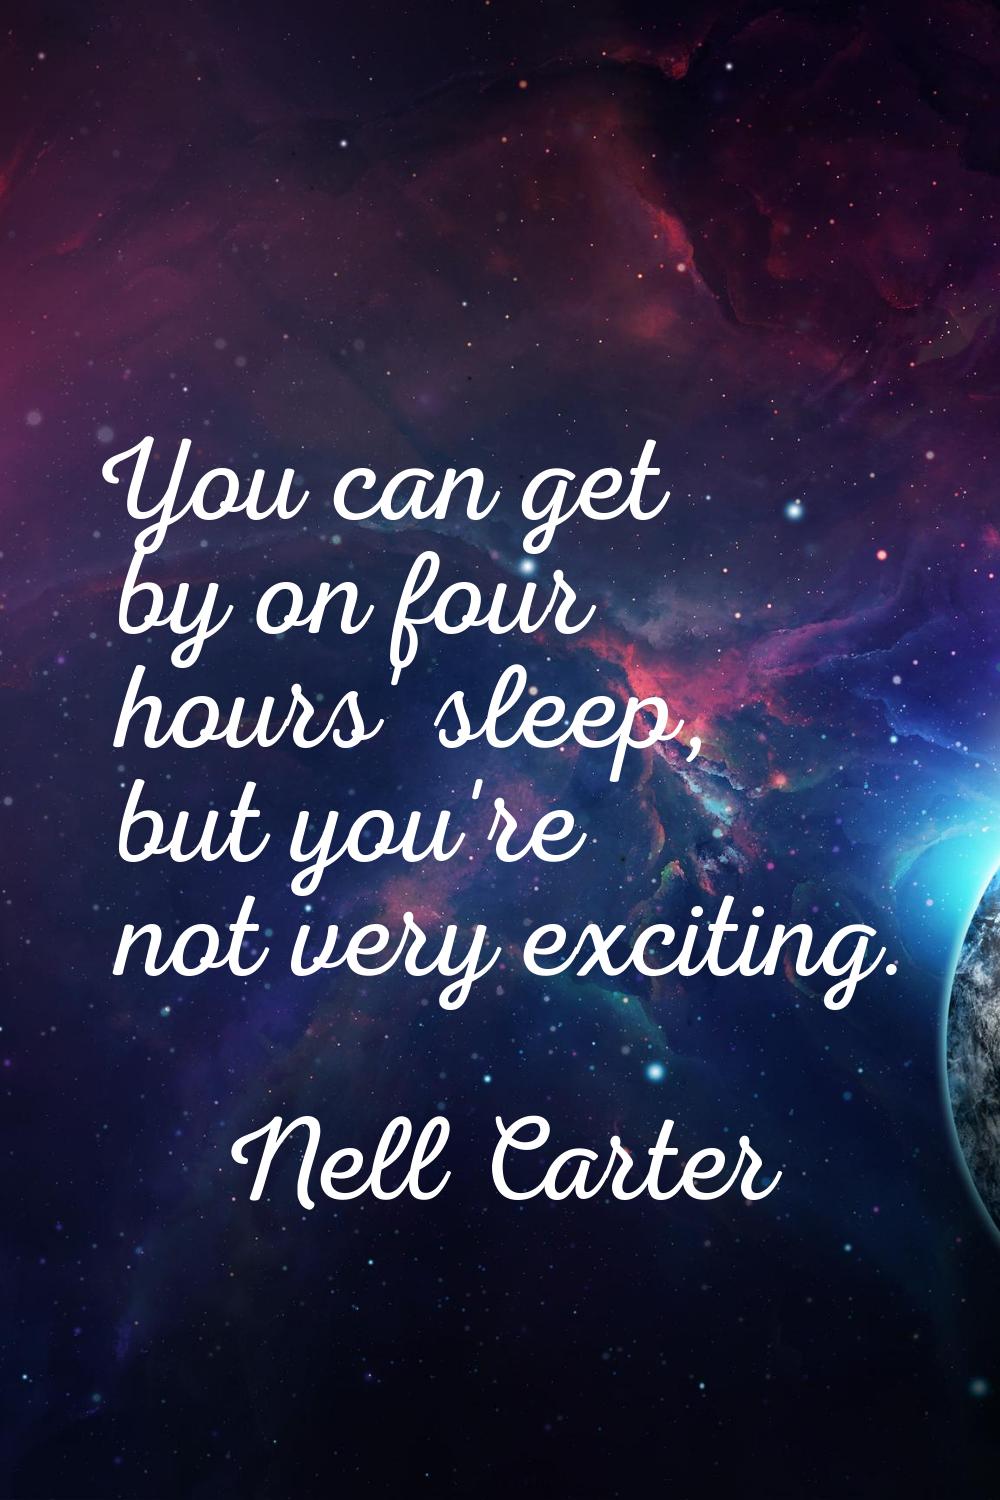 You can get by on four hours' sleep, but you're not very exciting.